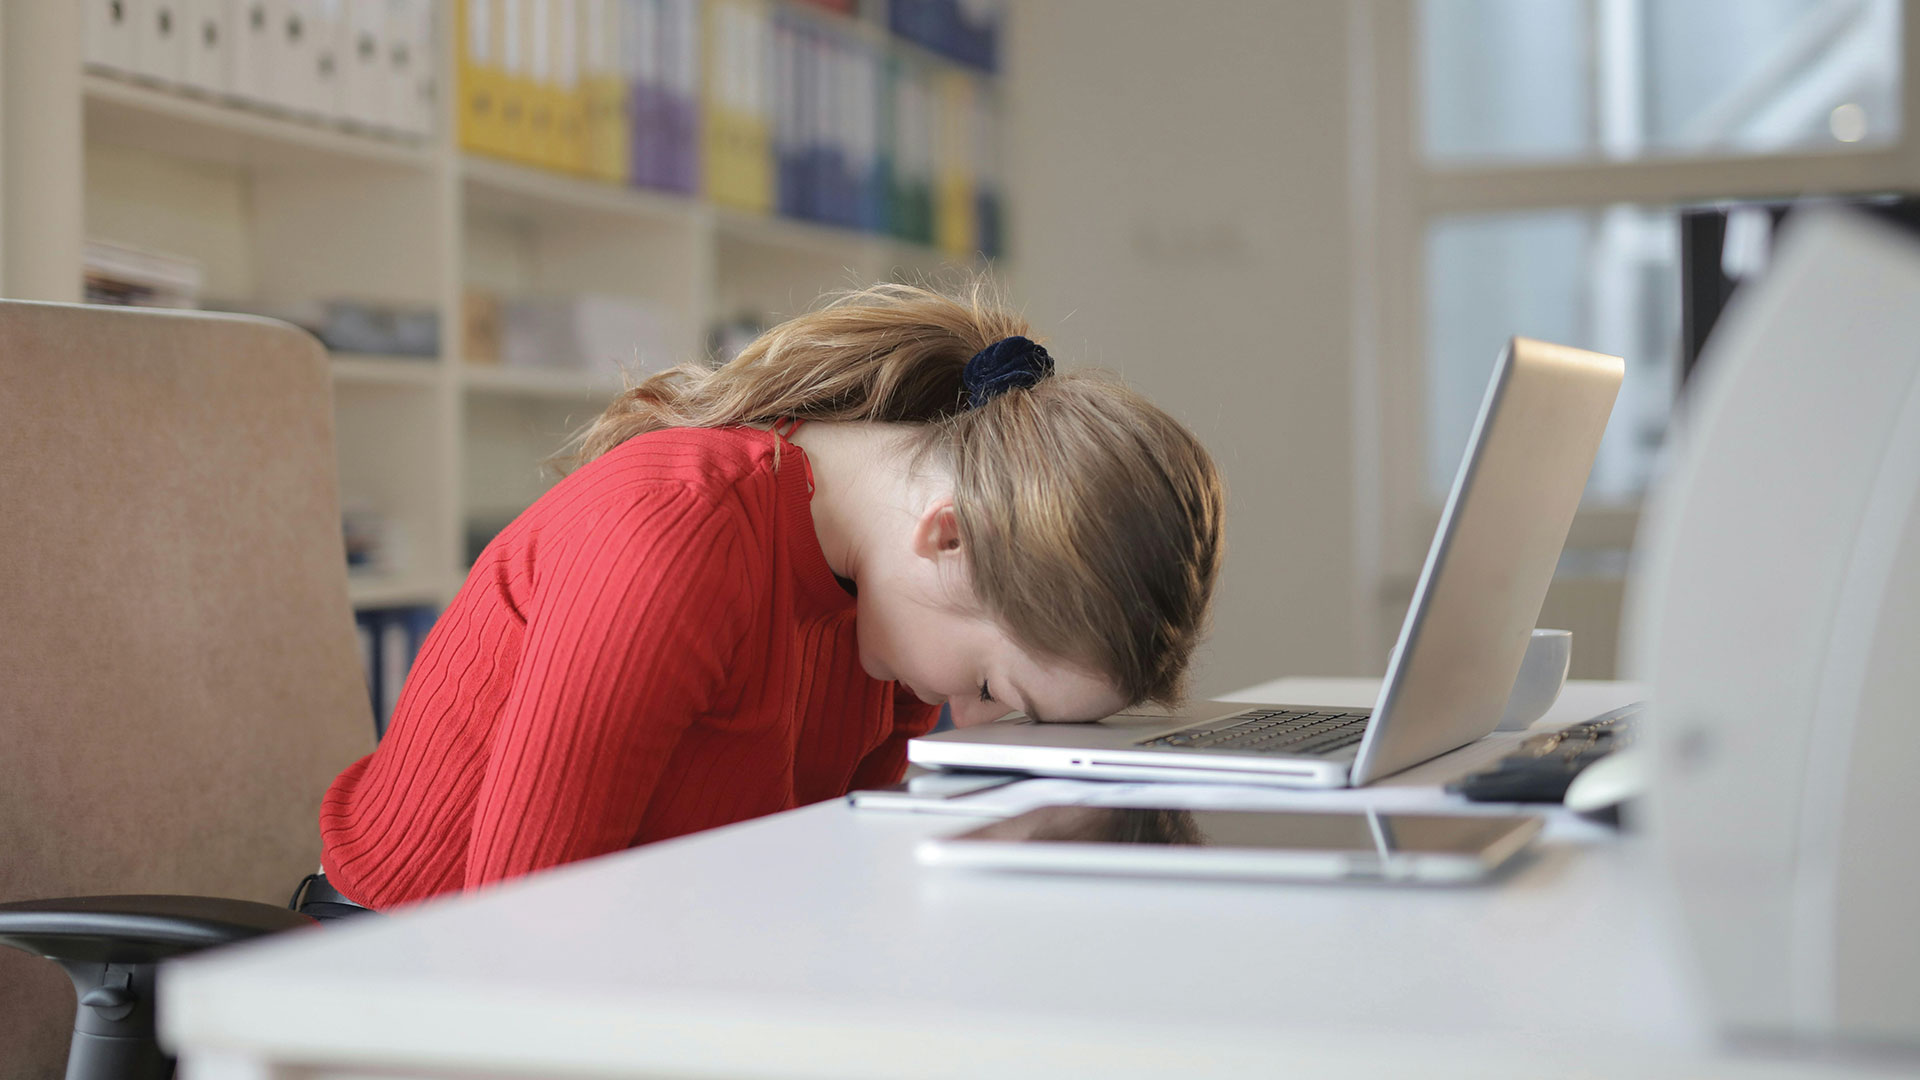 Fast Burn: What to do when job-related anxiety reaches fever pitch